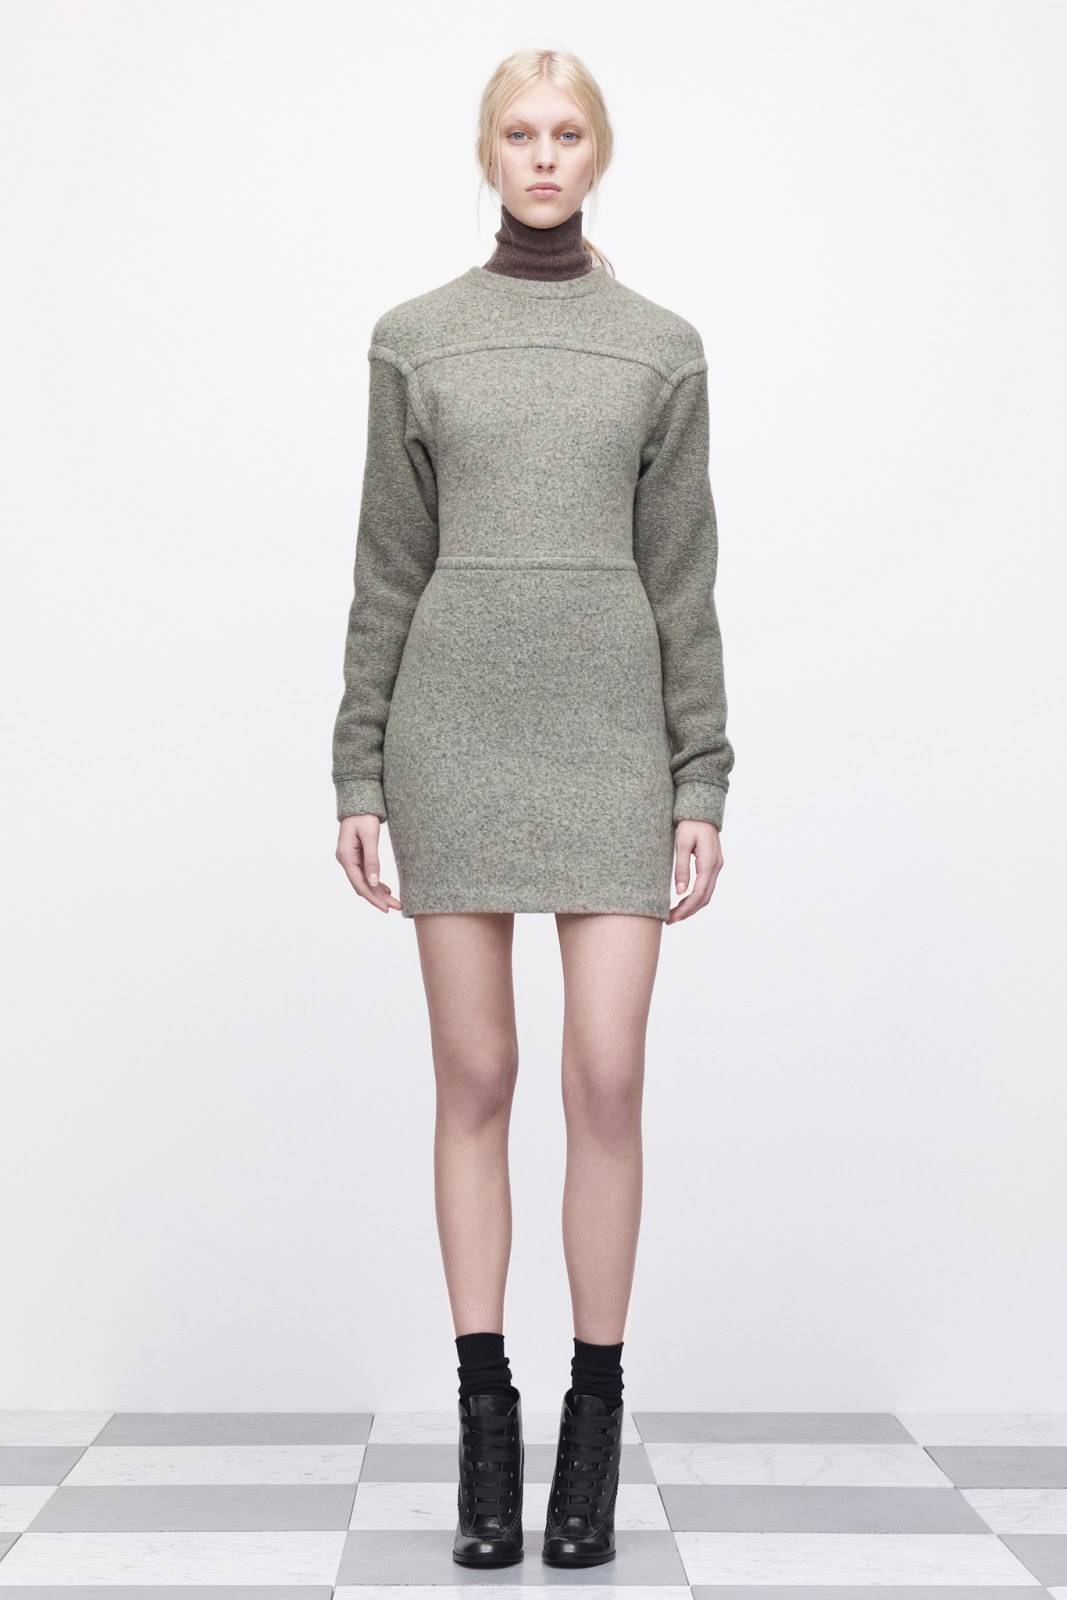 juliana schurig for t by alexander wang f/w 13.14 new york | visual ...